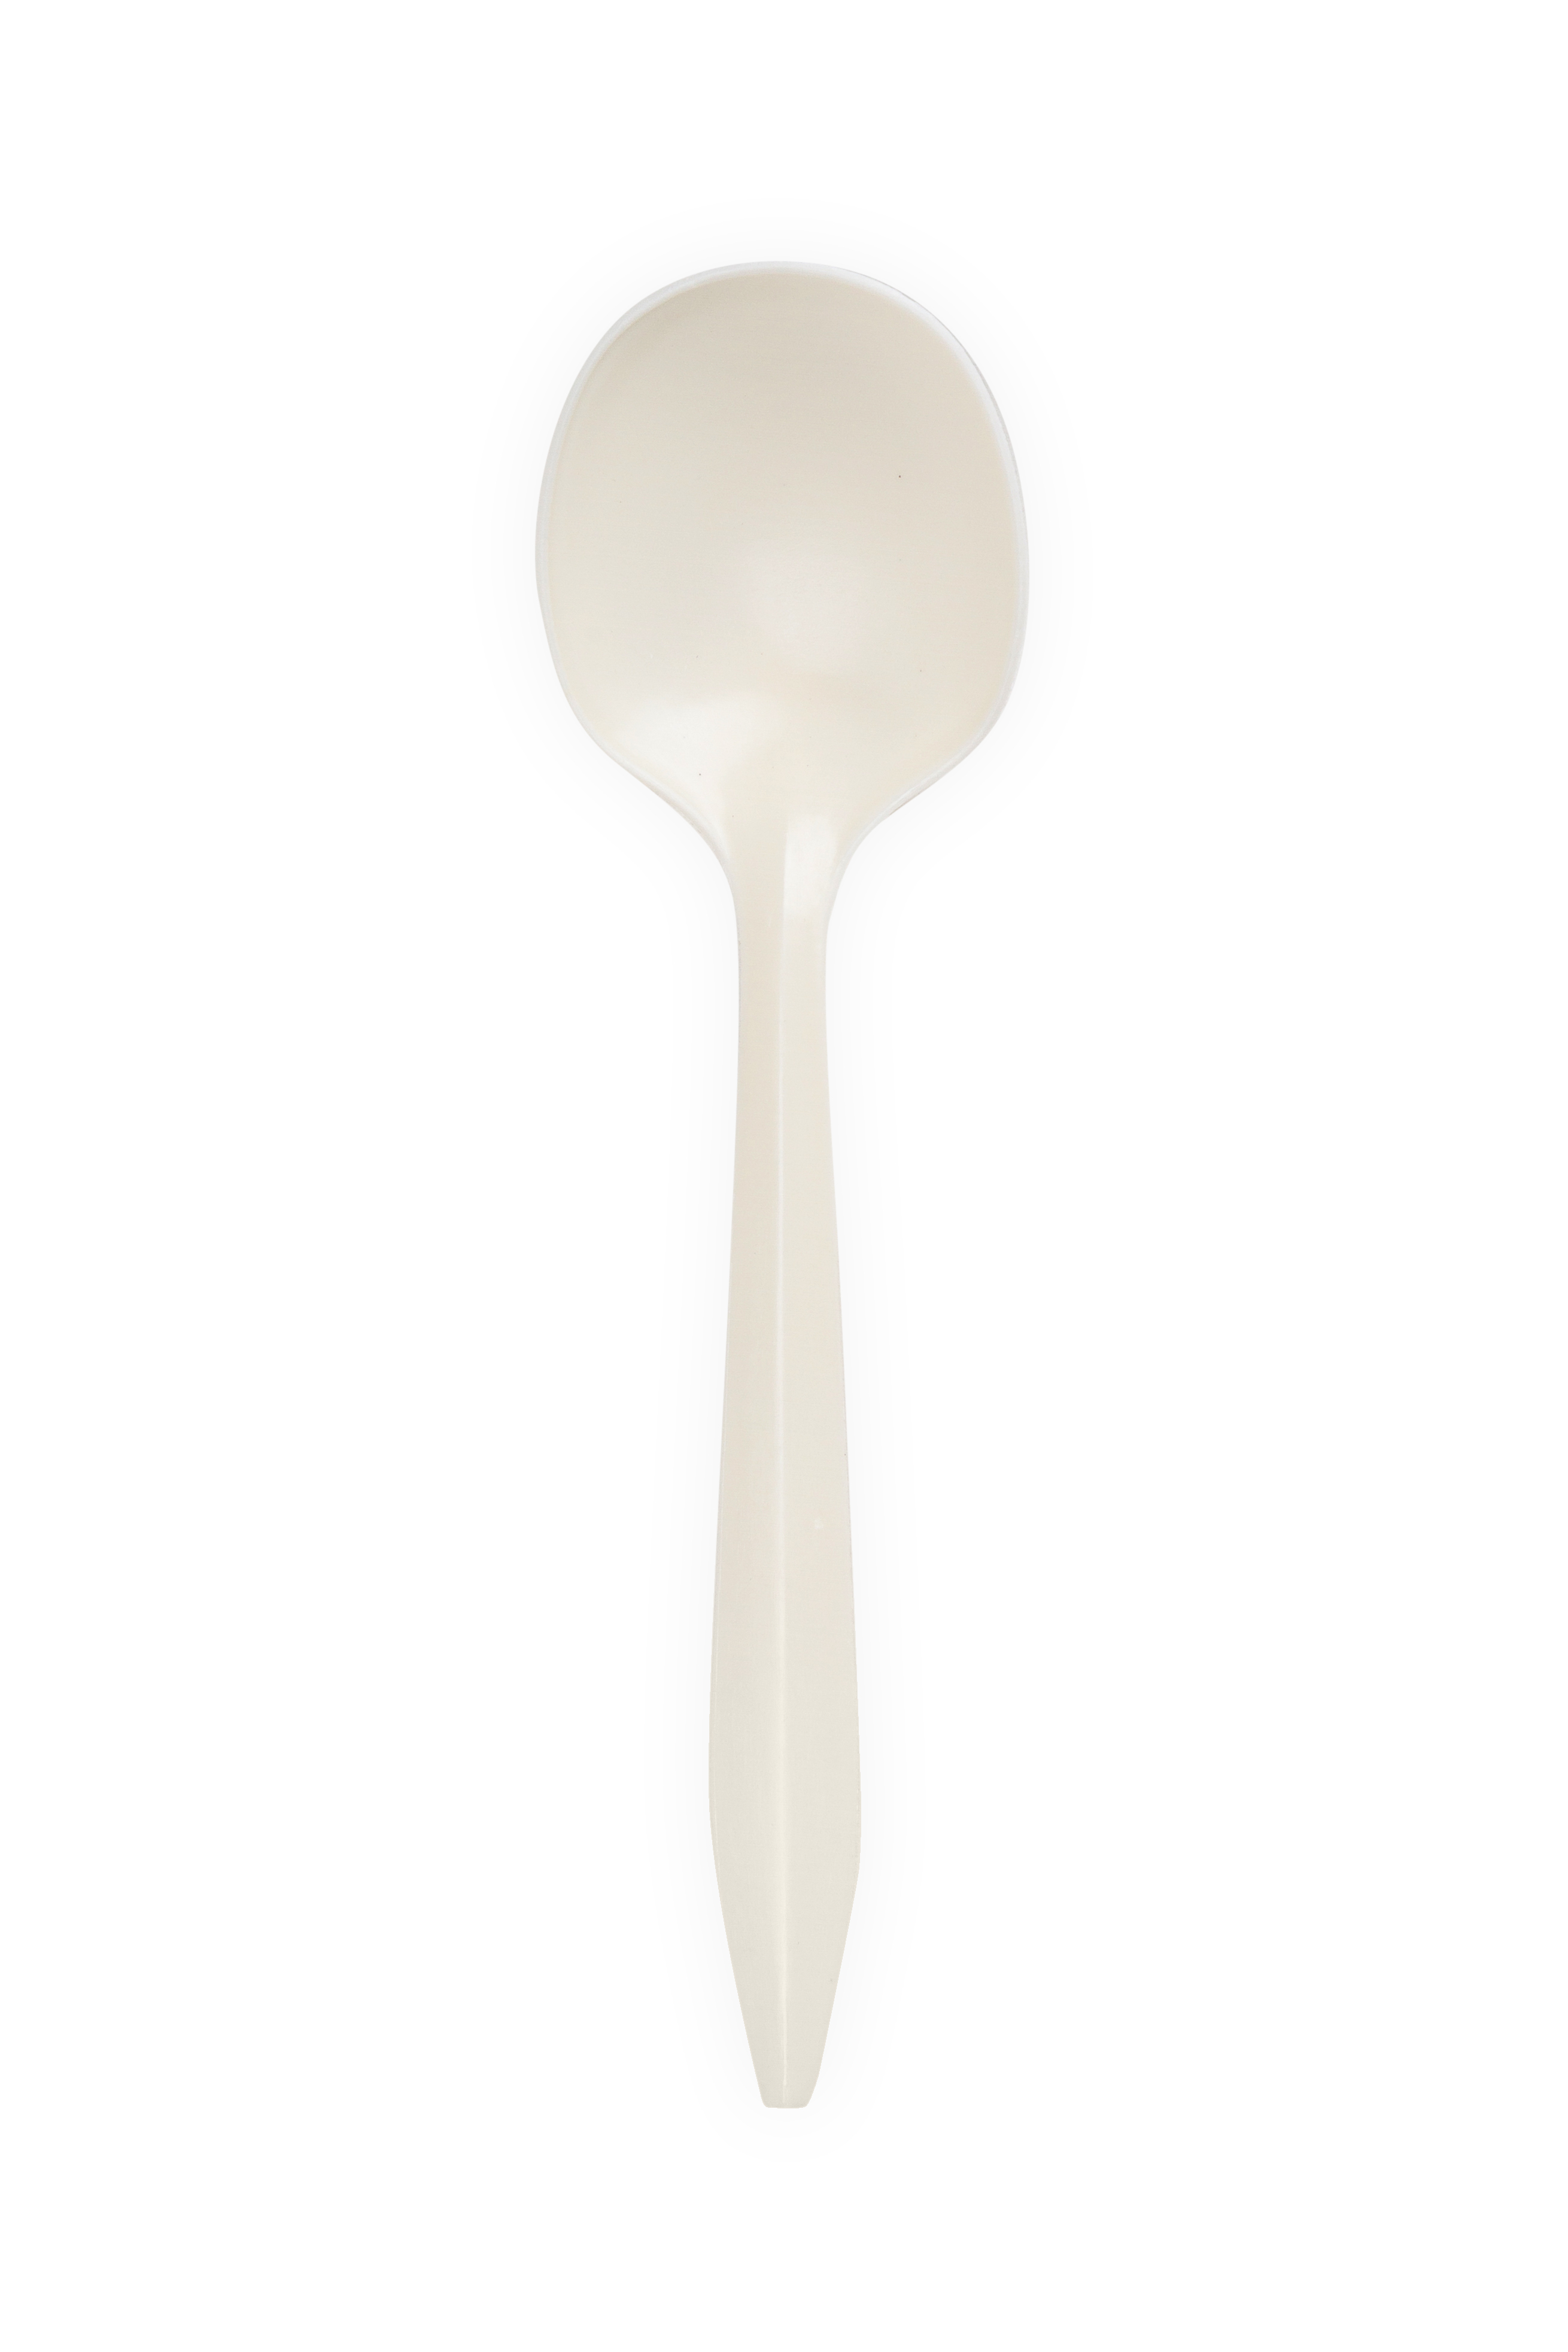 OSQ Spoon w 180 disposable biodegradable